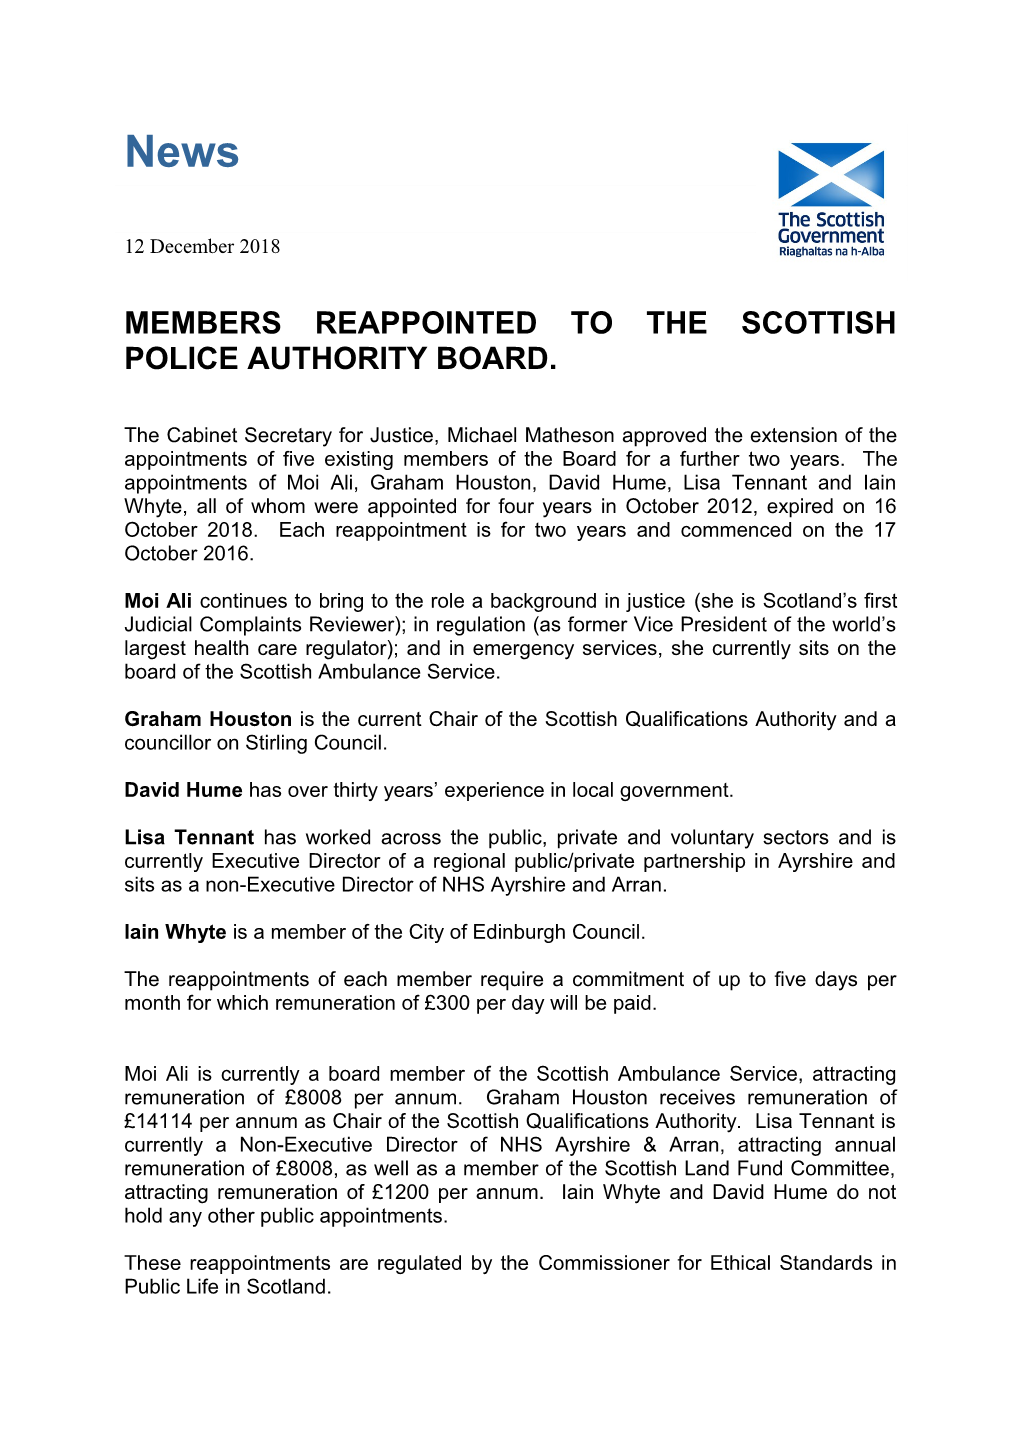 Members Reappointed to the Scottish Police Authority Board